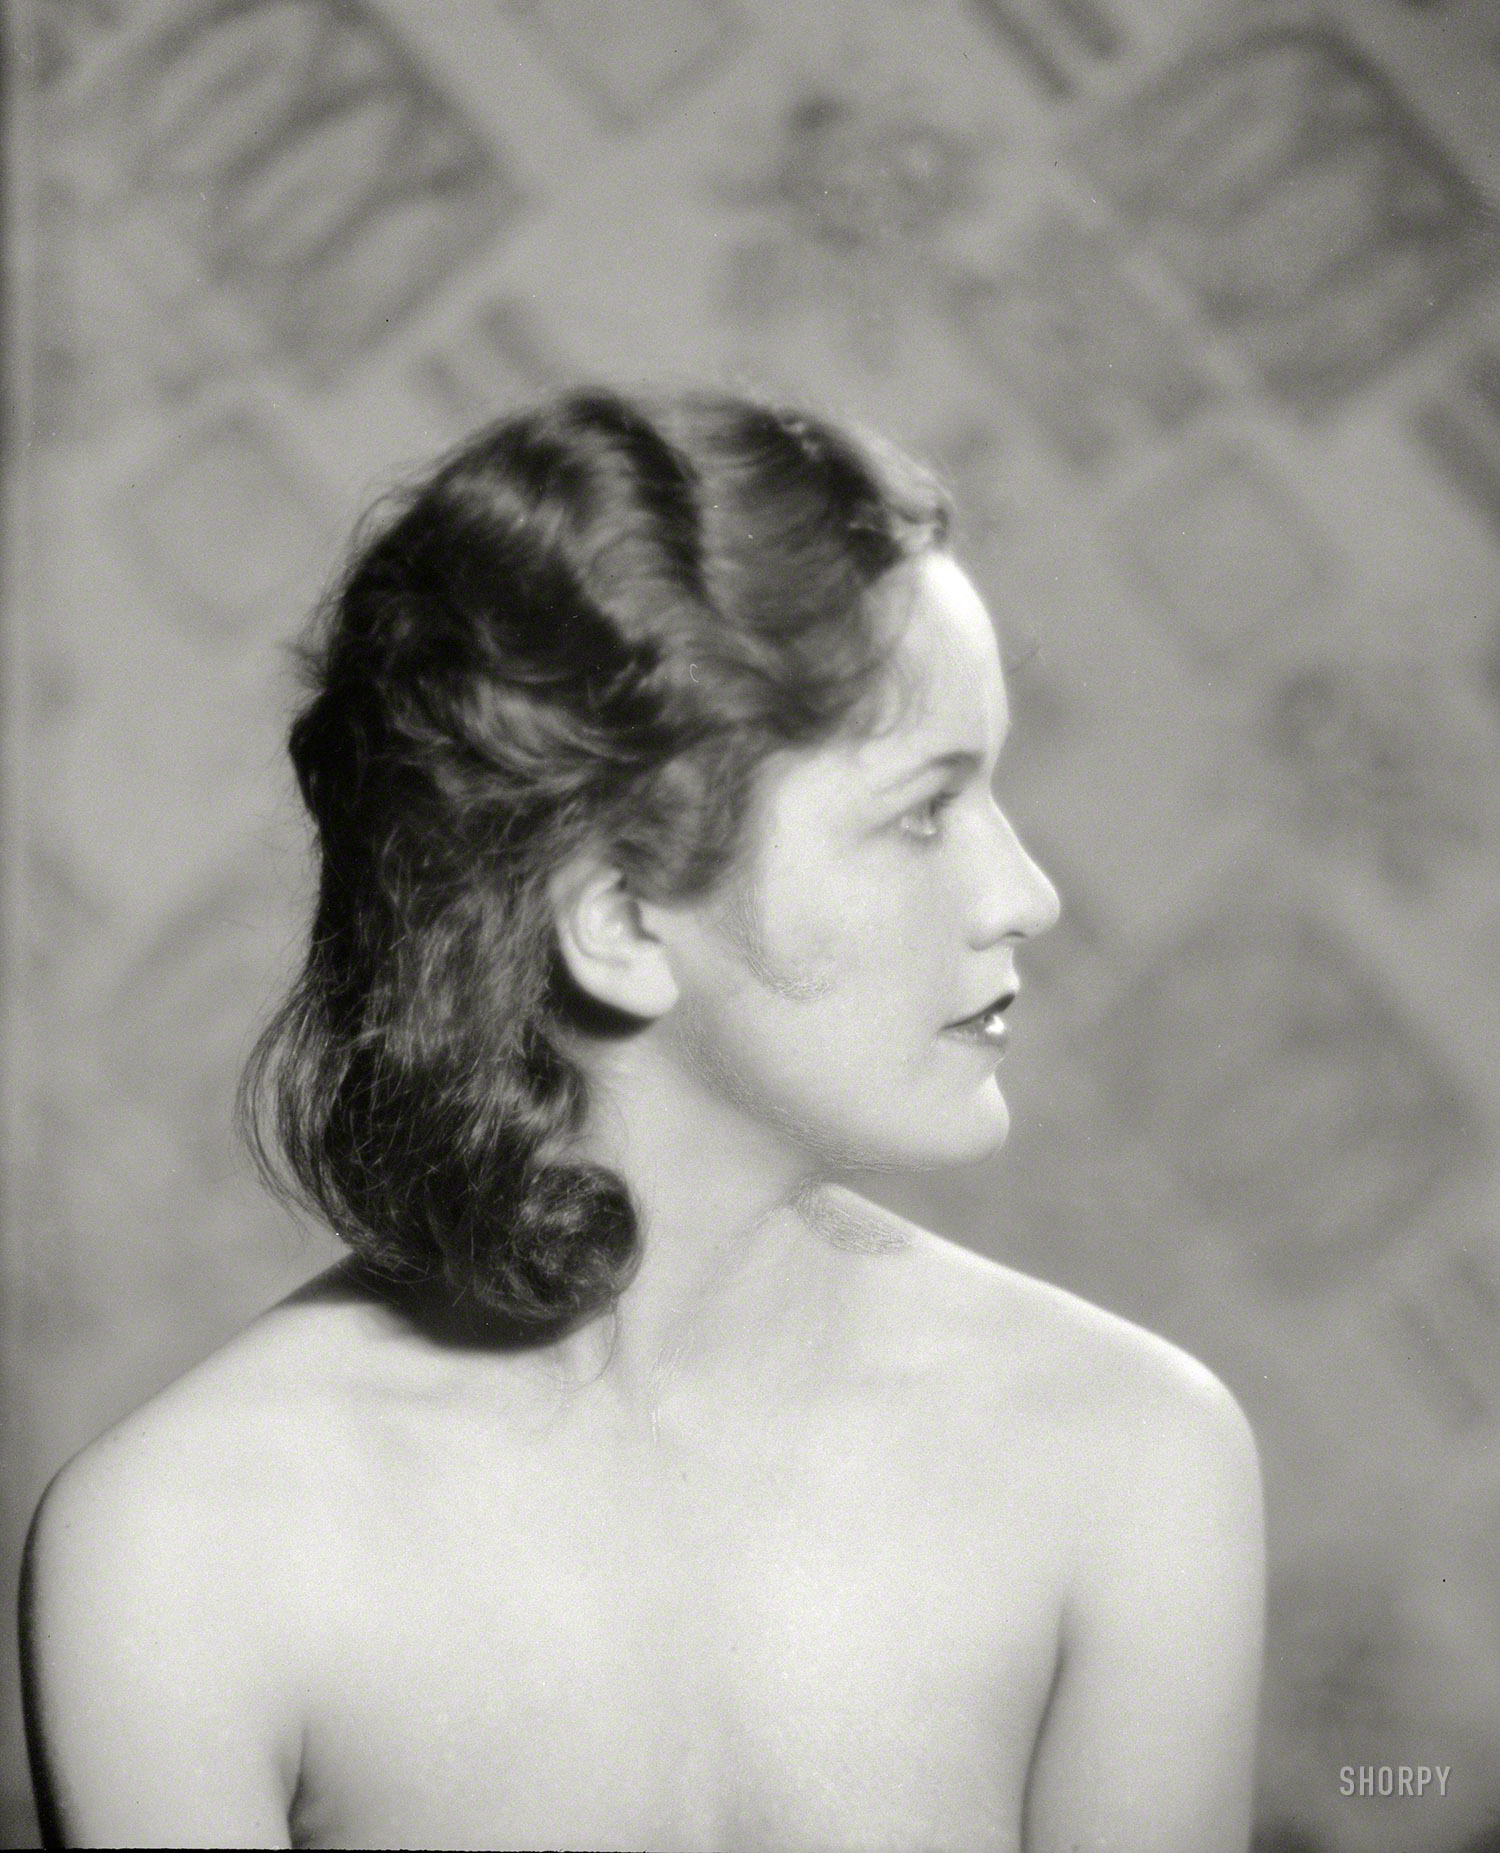 New York, 1930. "Margolies, Betty, Miss, profile view." Somewhere in Lower Manhattan: her neckline. 4x5 nitrate negative by Arnold Genthe. View full size.